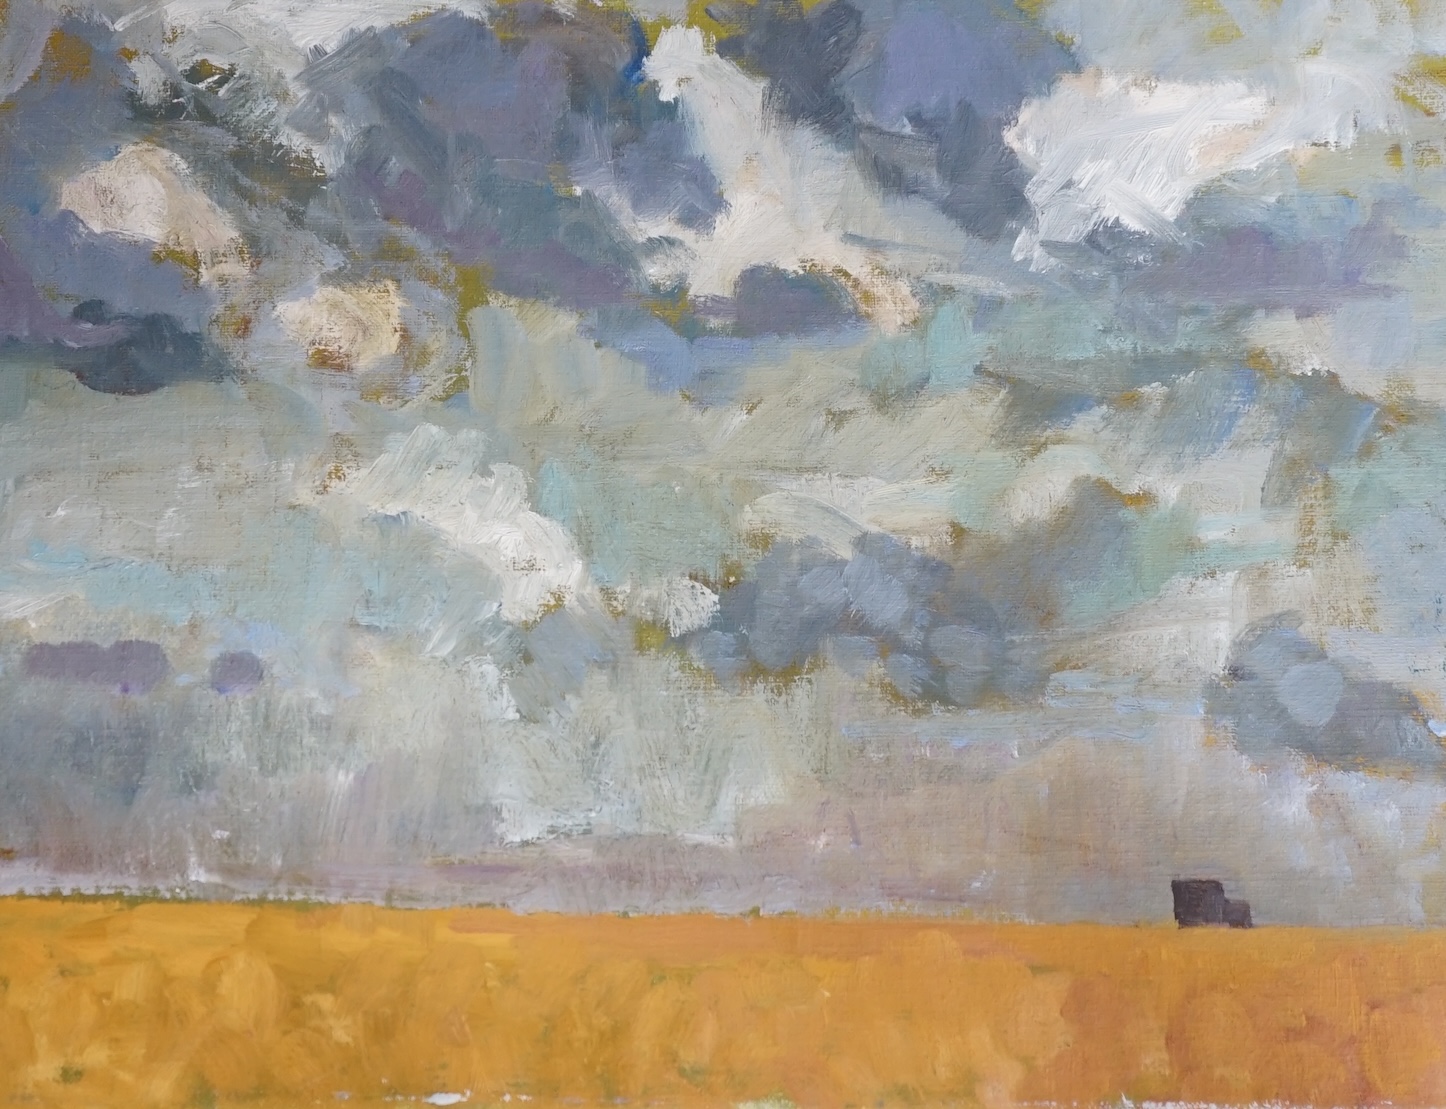 Gill Speirs, oil on canvas, landscape, unsigned, 29 x 40cm unframed. Condition - good